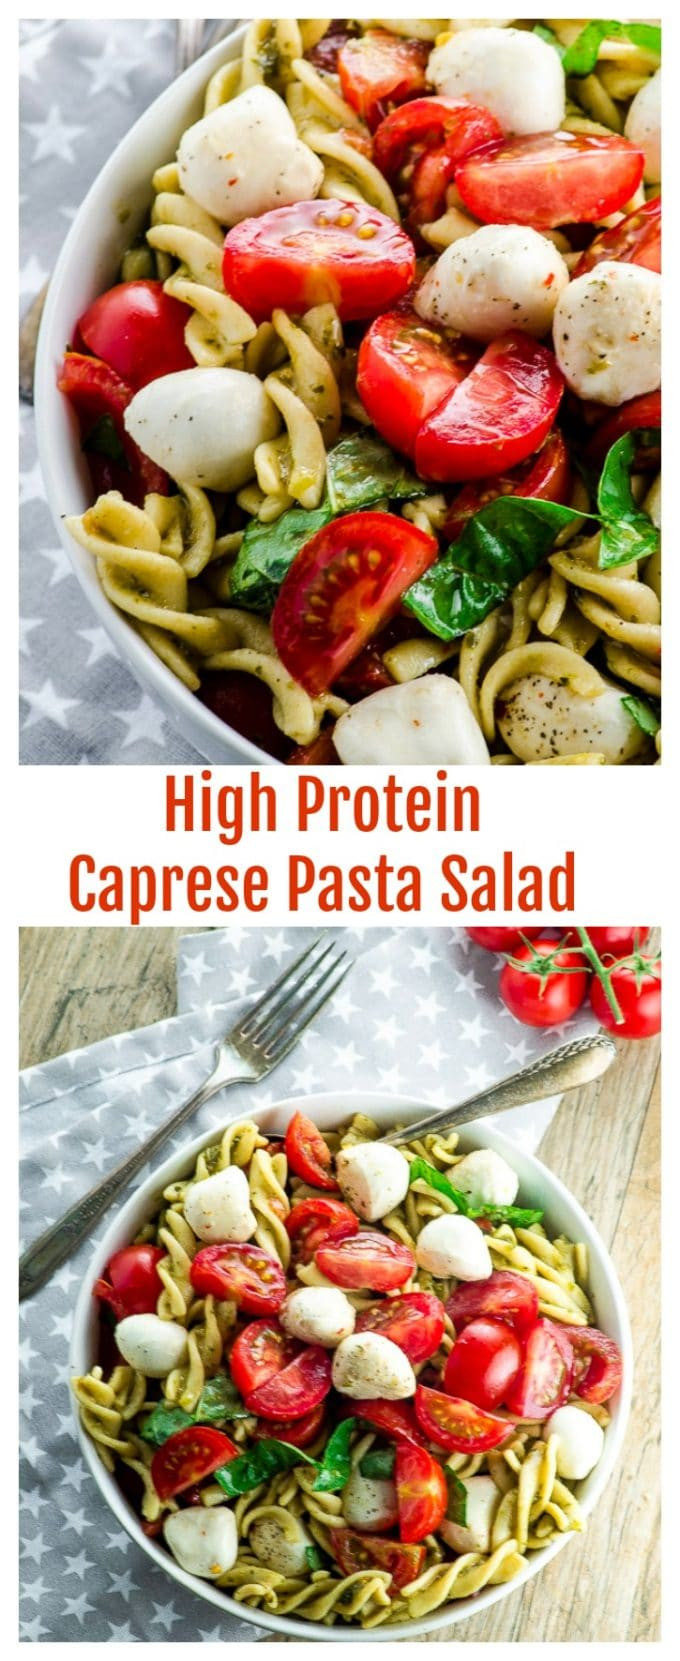 High Protein Vegetarian Salad
 High Protein Caprese Pasta Salad May I Have That Recipe